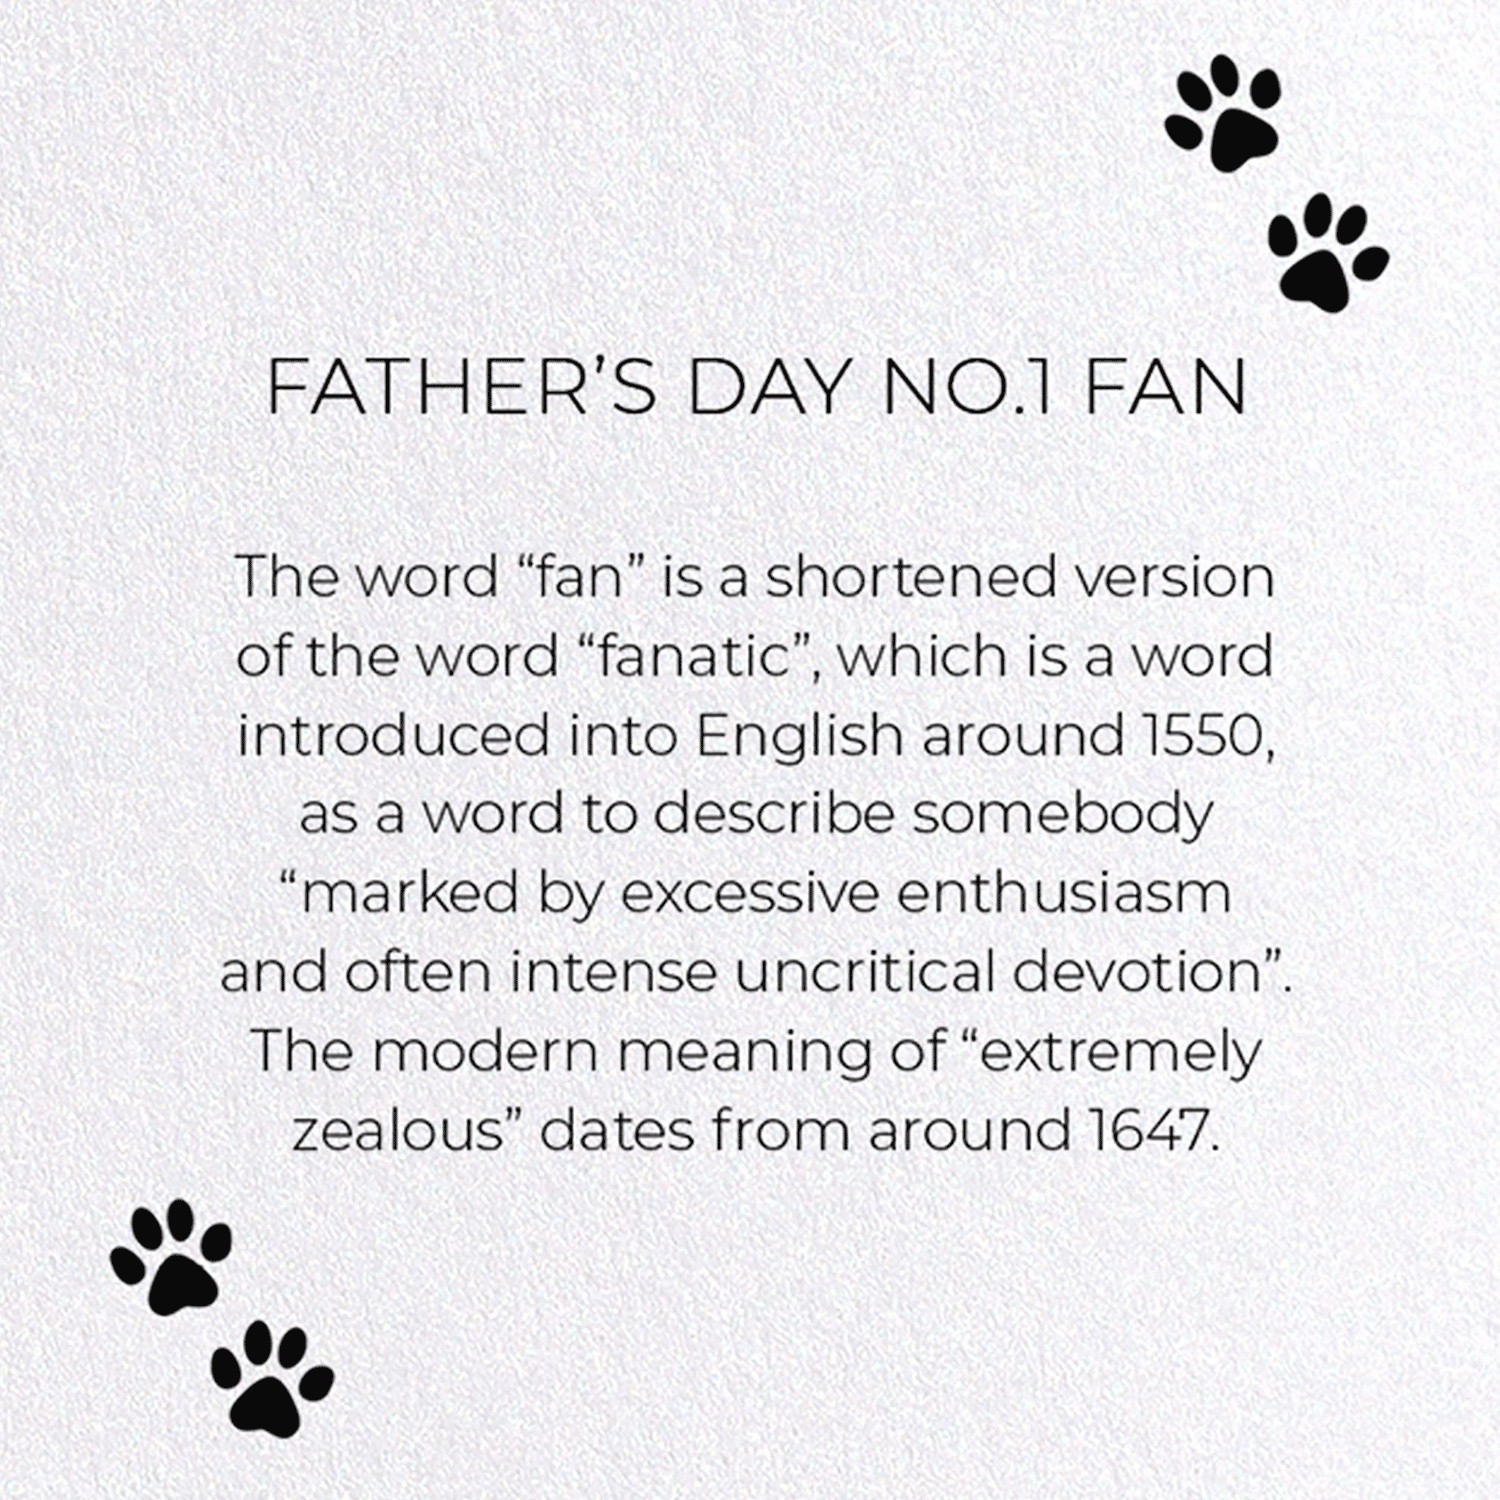 FATHER'S DAY NO.1 FAN: Funny Animal Greeting Card